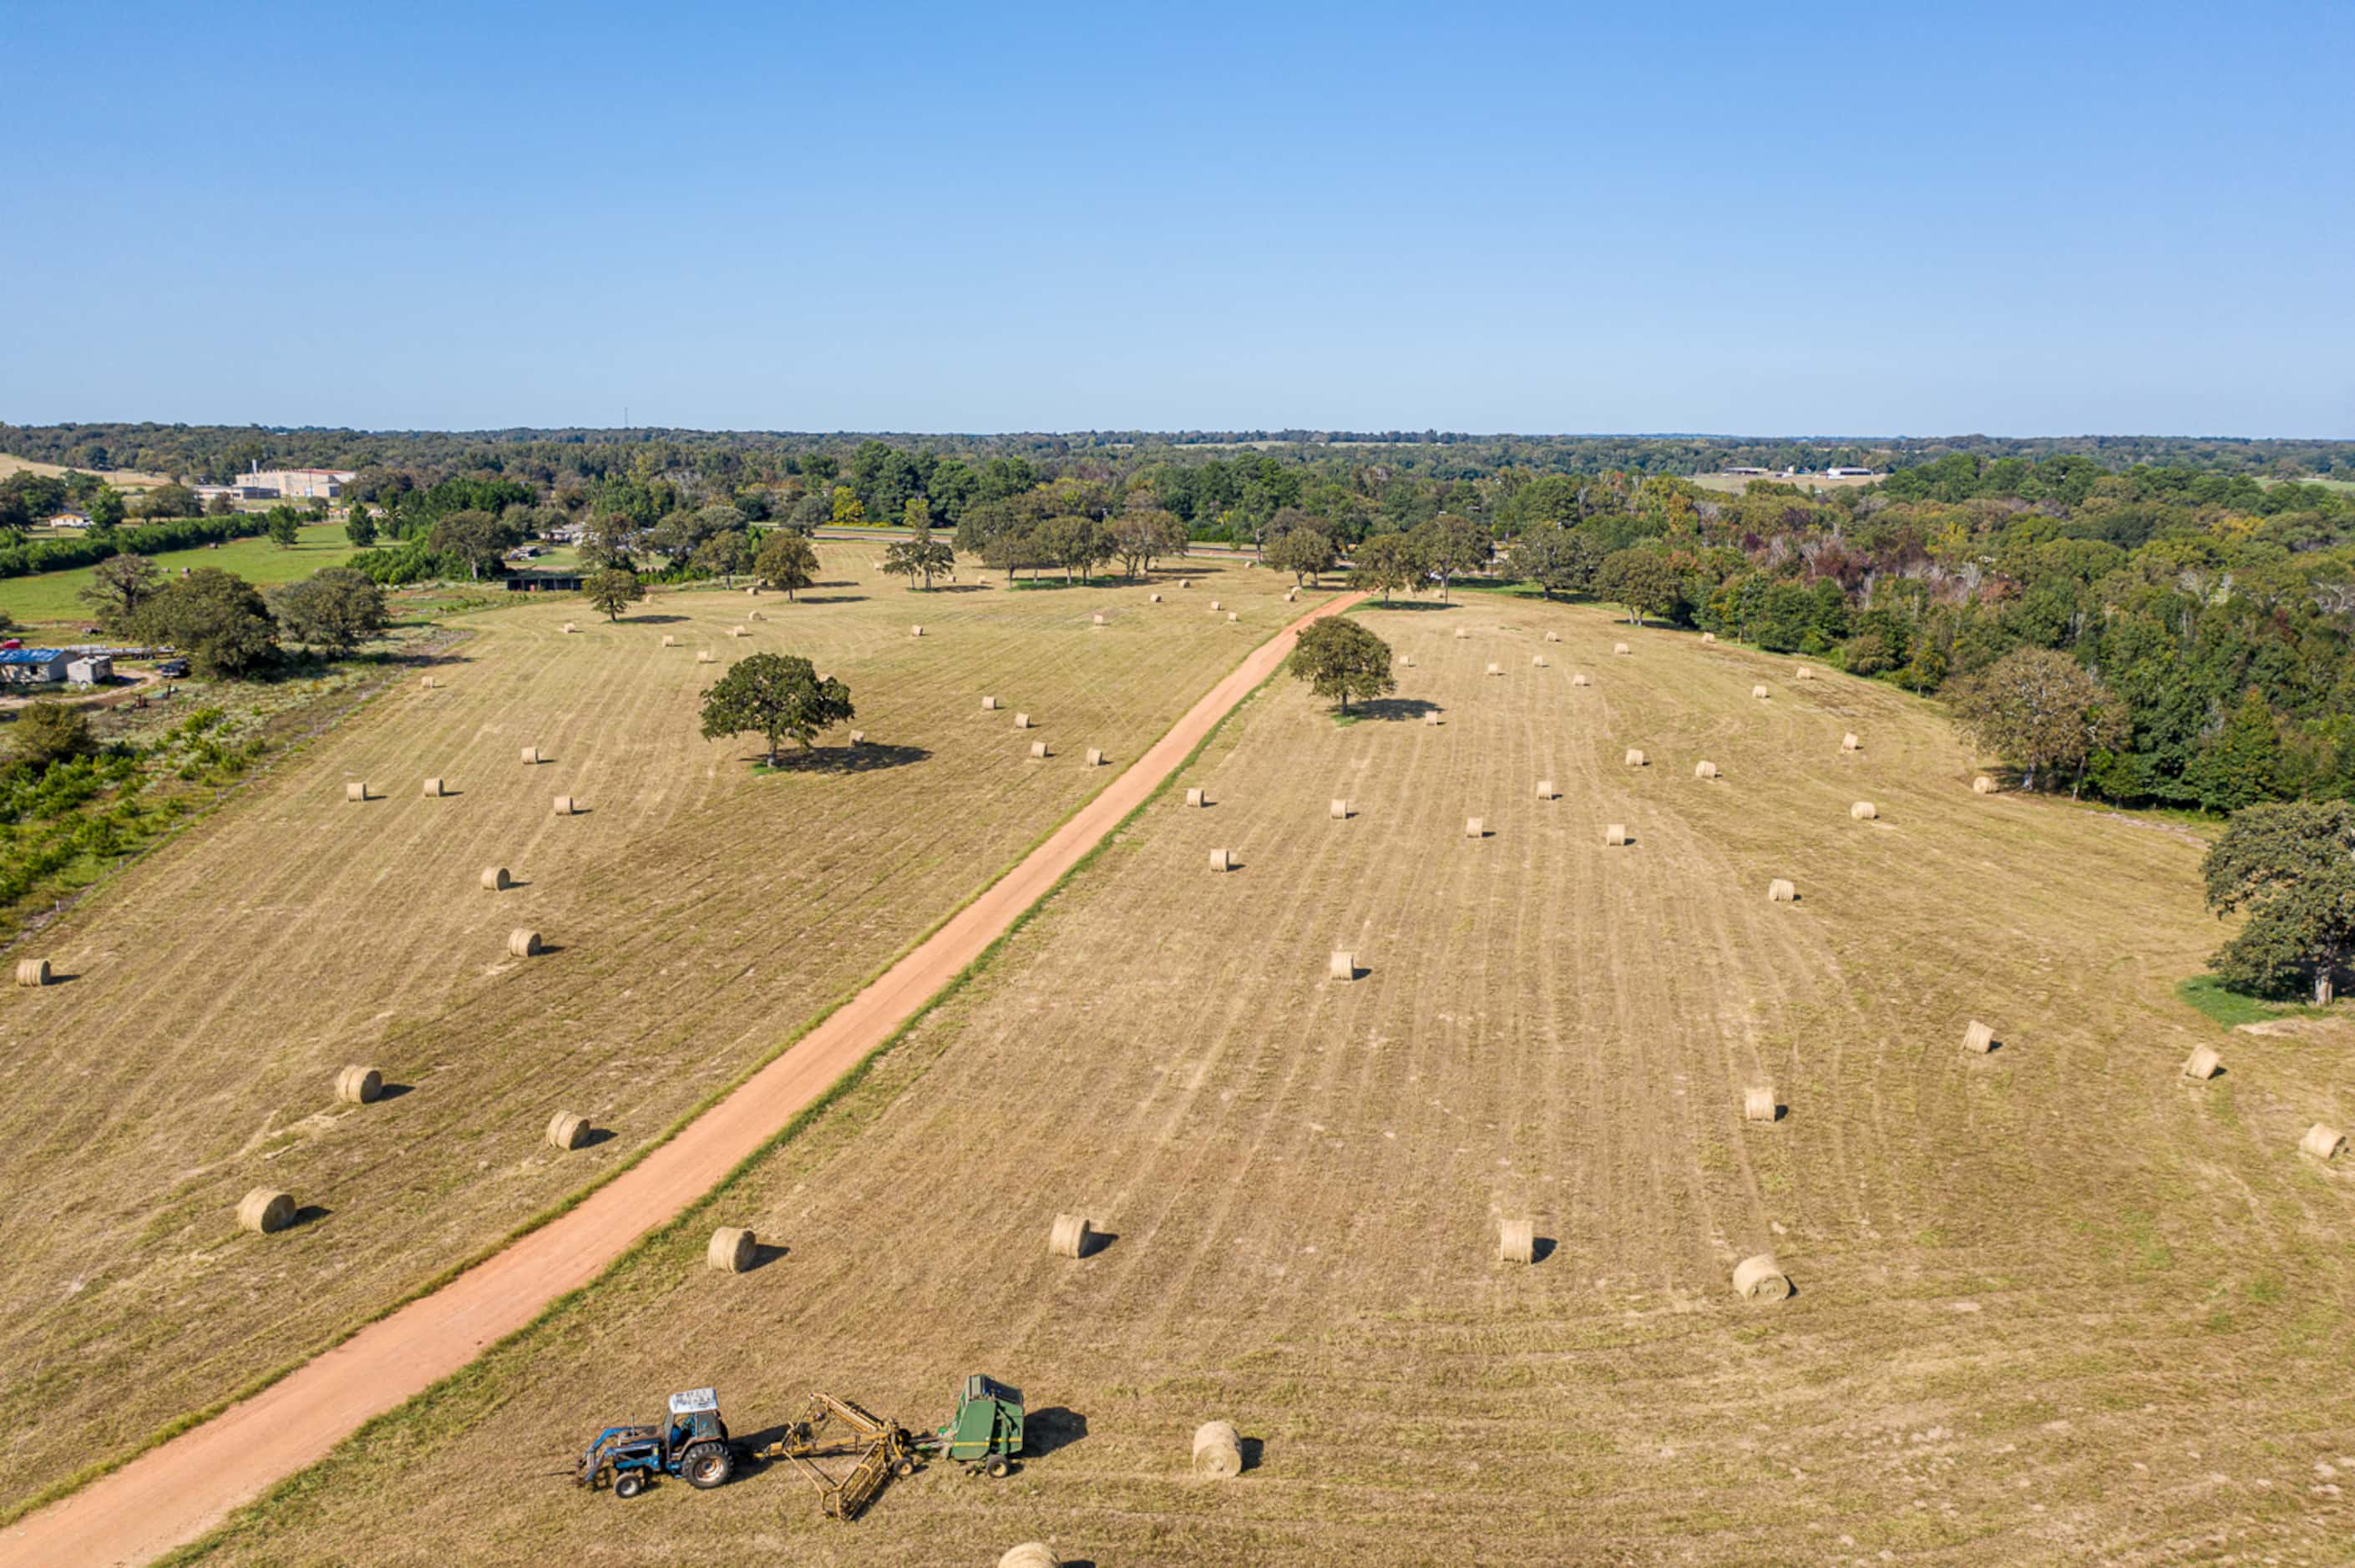 “Sugaree is an incredible ranch opportunity and in my opinion an astute real estate...